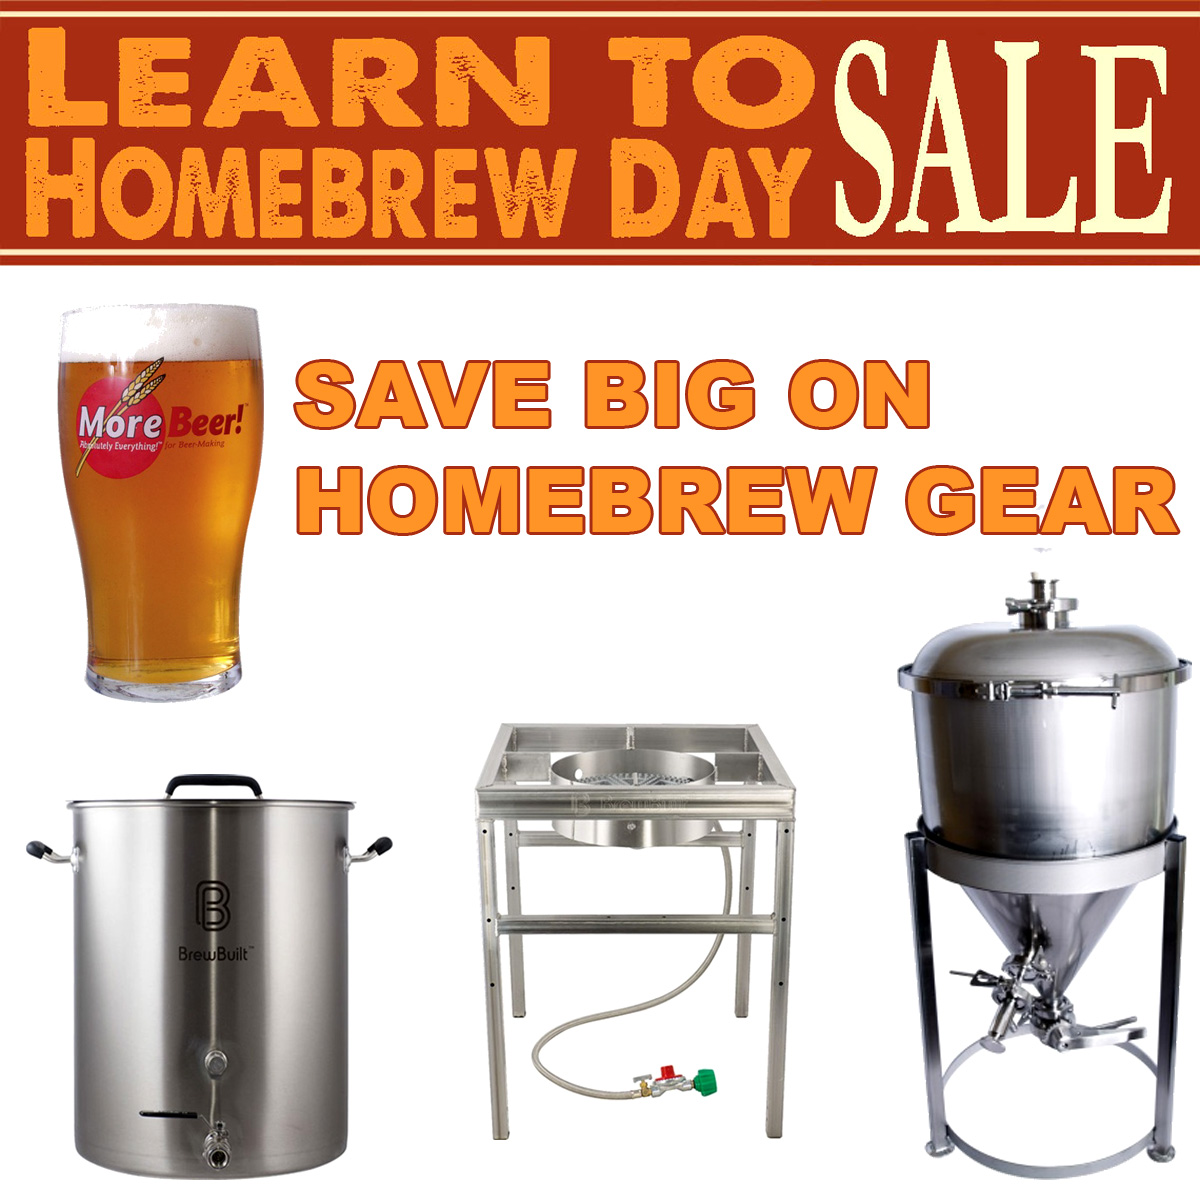  Coupon Code For Save Up To 25% On Popular Home Brewing Items Coupon Code